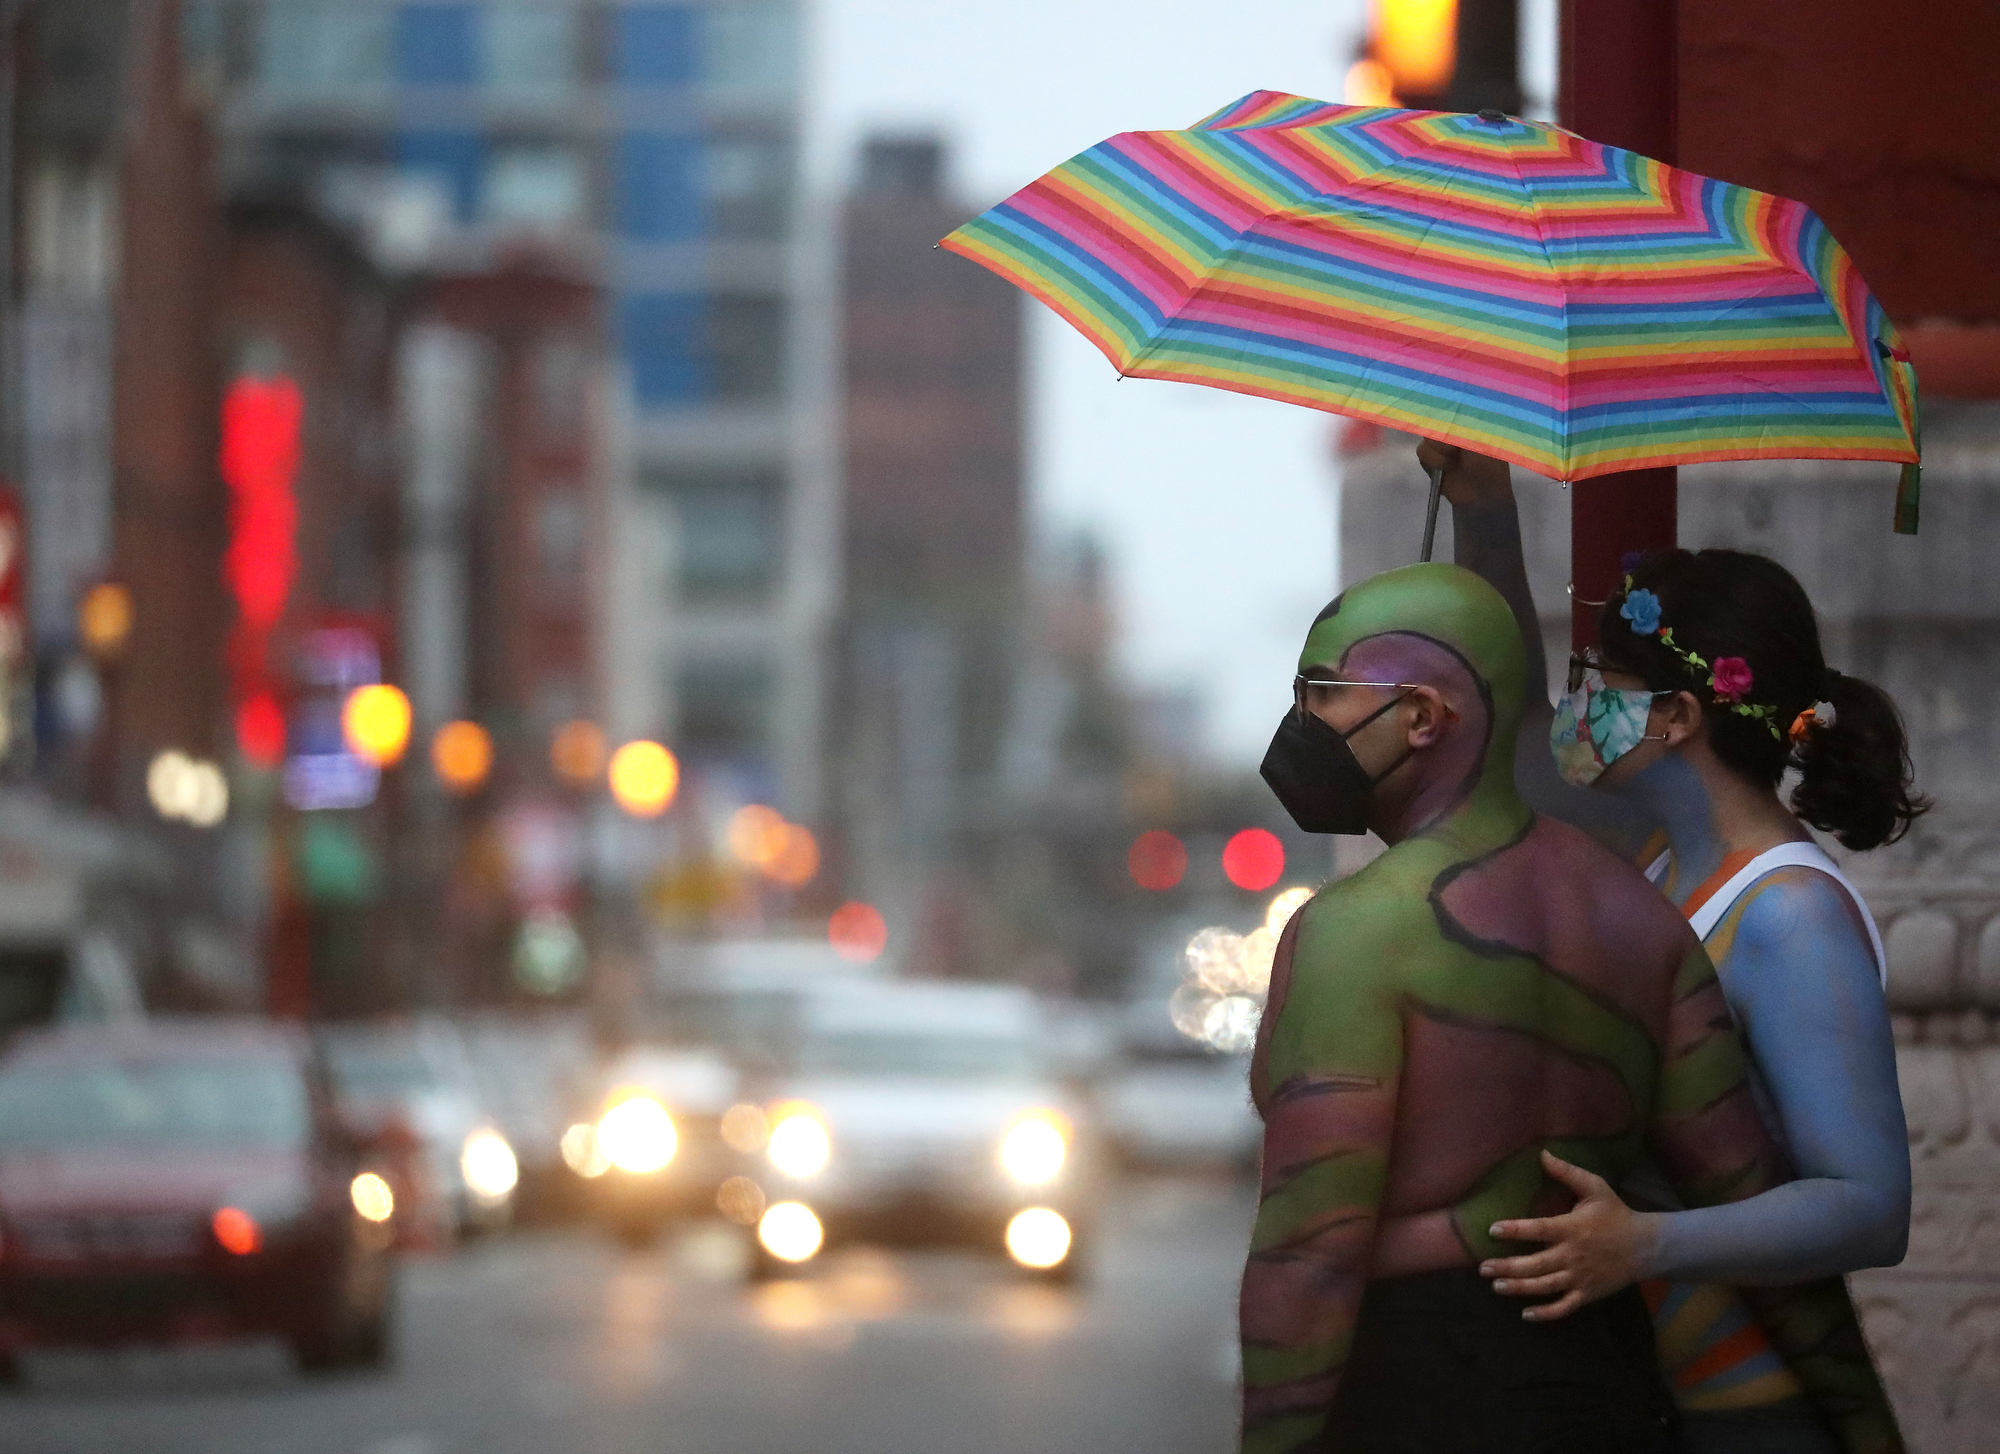 Two people wait the arrival of participants in the Philly Naked Bike Ride at the intersection of 10th and Arch streets in Philadelphia, Saturday, Aug. 28, 2021.